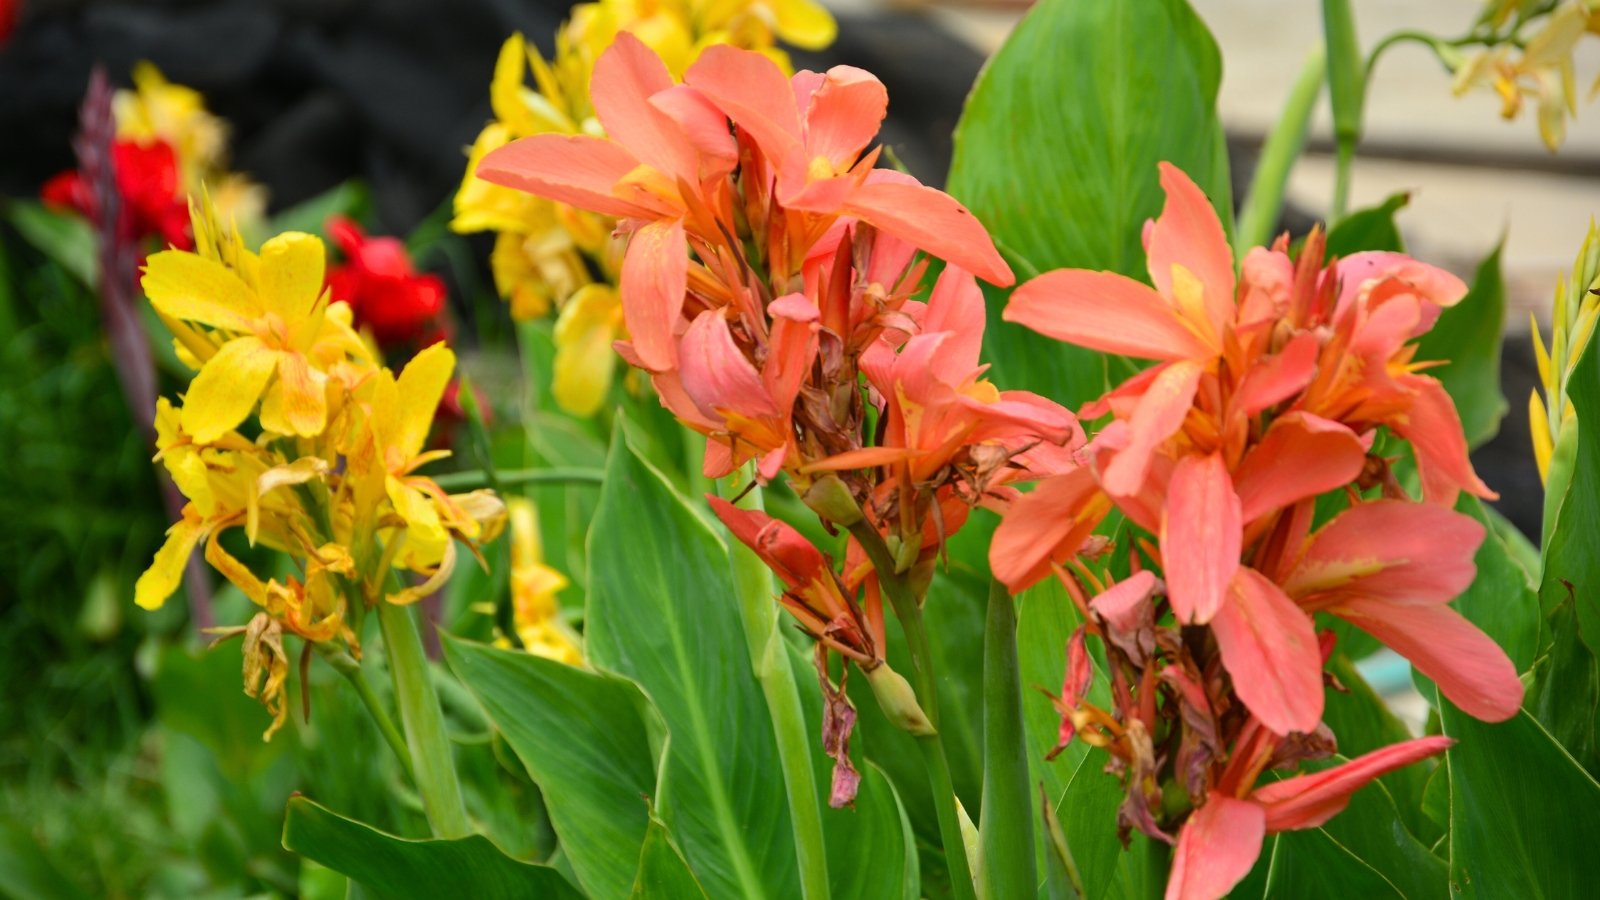 Canna lilies display tall, elegant stems and broad, paddle-shaped leaves, crowned with showy, lily-like flowers in yellow and coral shades.